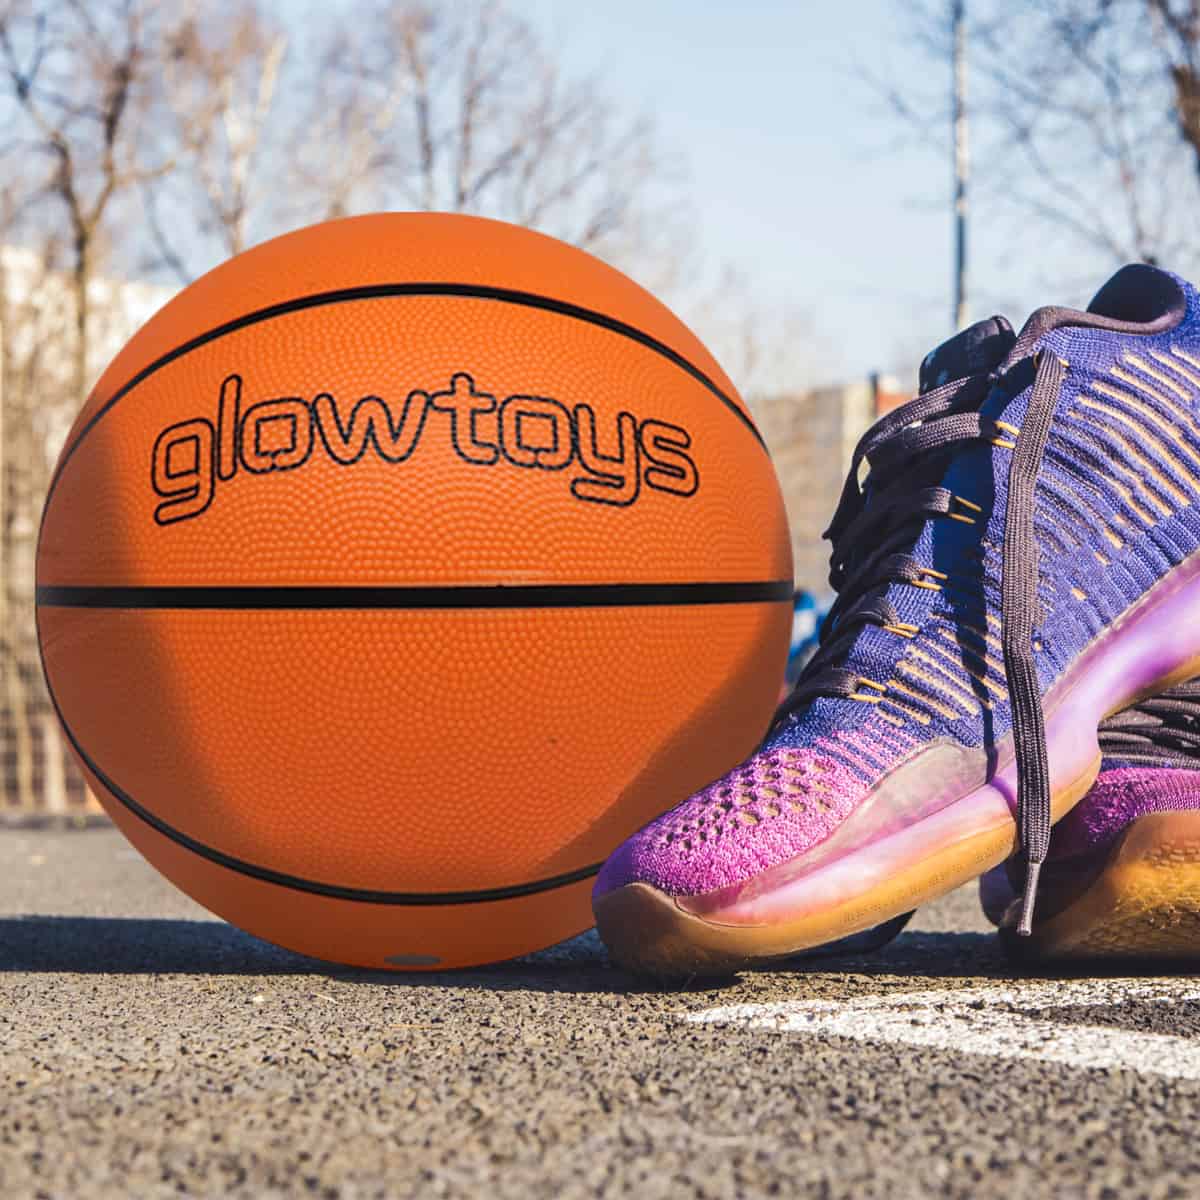 light up basketball, glow basketball, glow in the dark toys, glow toys, glow sports toys, light up toys, light up sports toys, best light up basketballs, gift for children, birthday gift ideas, sports birthday gifts, gifts for boys, gifts for basketball players, led basketball 